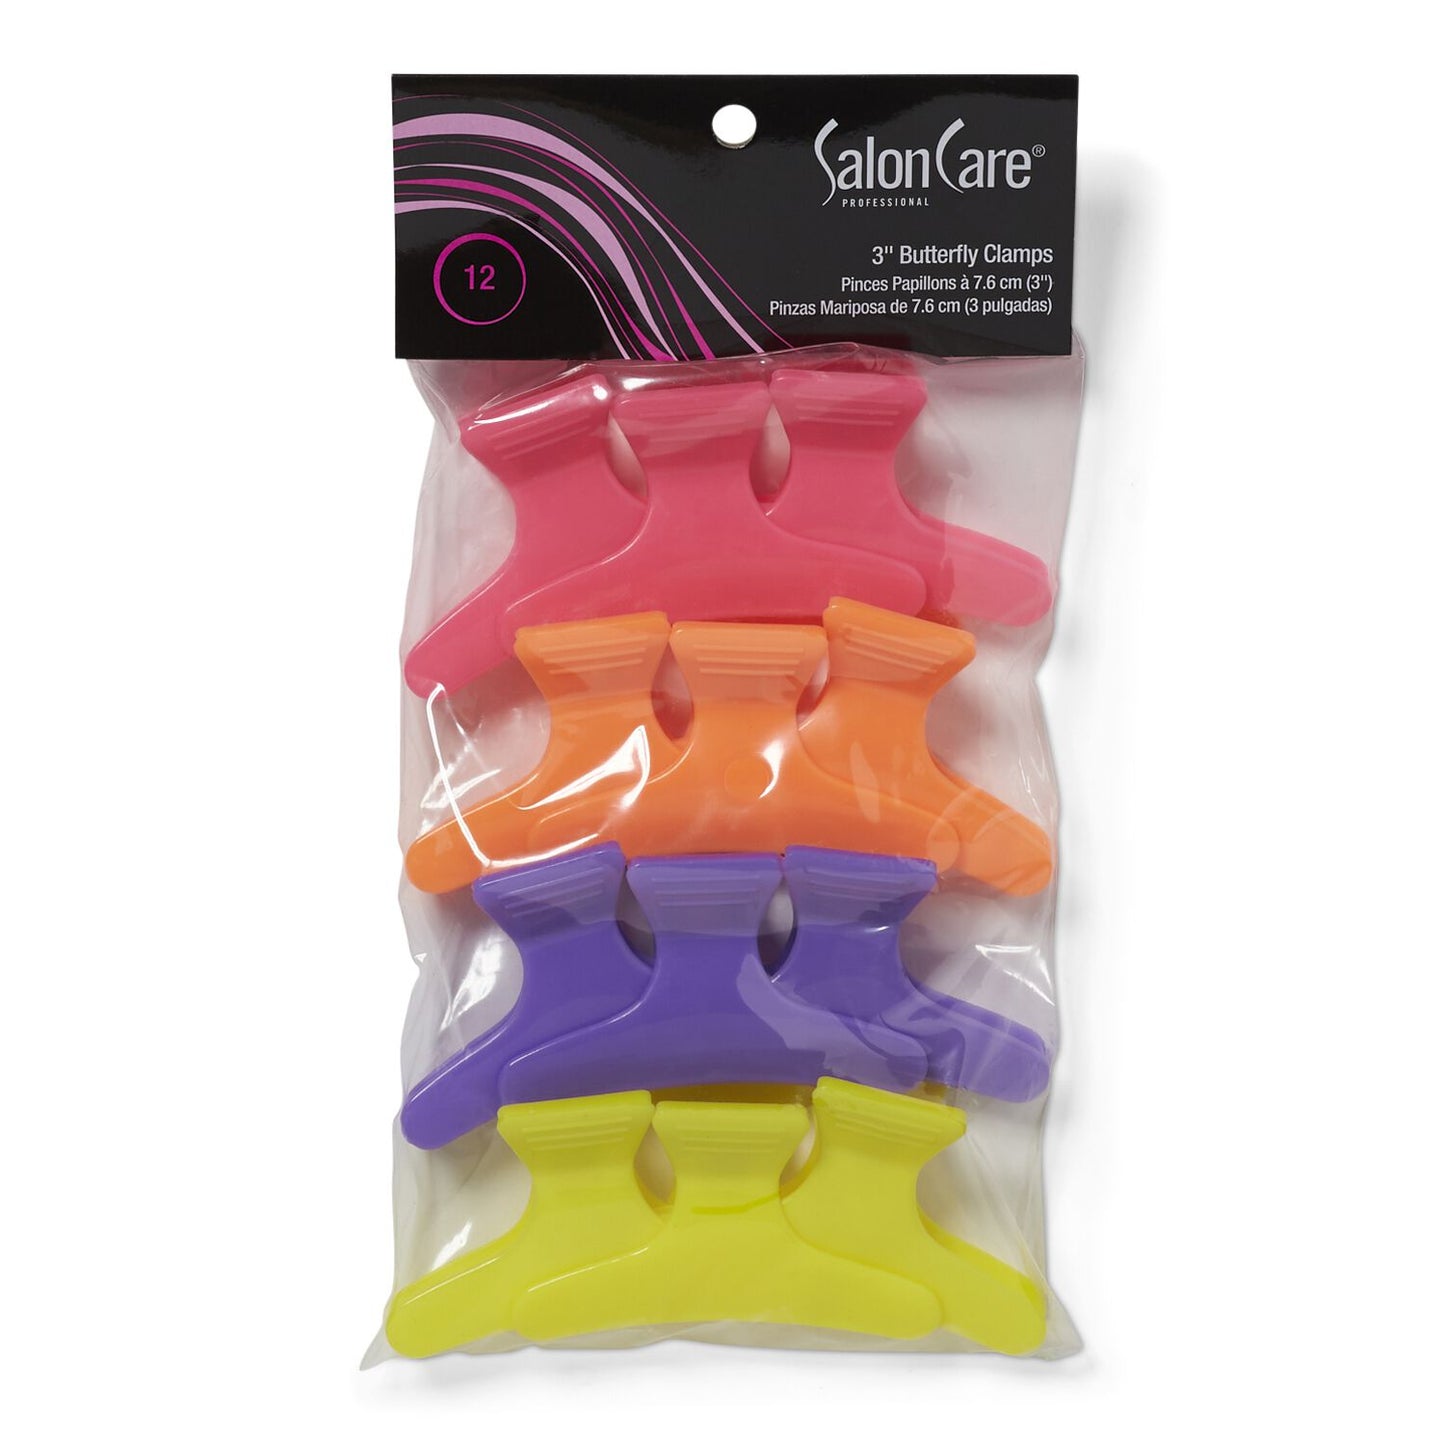 Salon Care 3" Butterfly Clamps